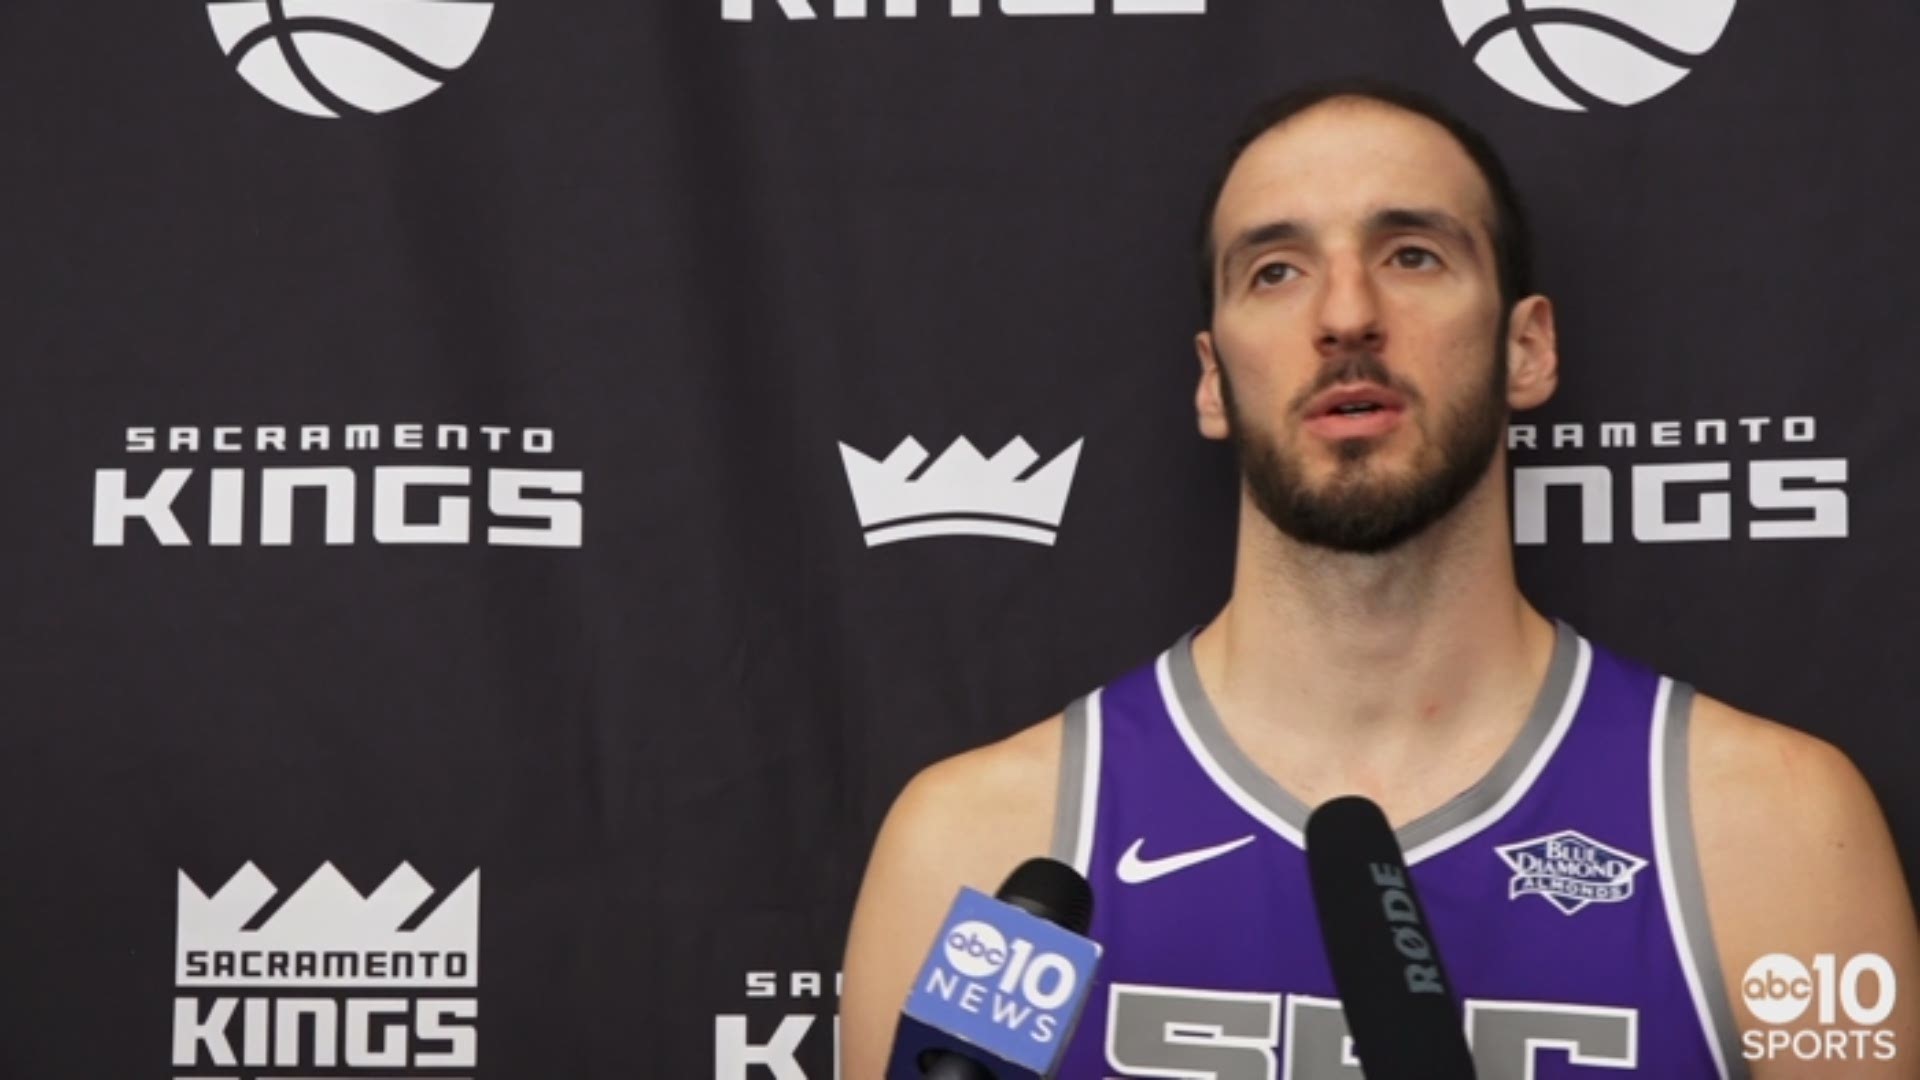 Sacramento Kings center Kosta Koufos meets with the media on Monday to talk about his busy offseason, which included him getting married, his impression of the young roster and taking more of a leadership role.